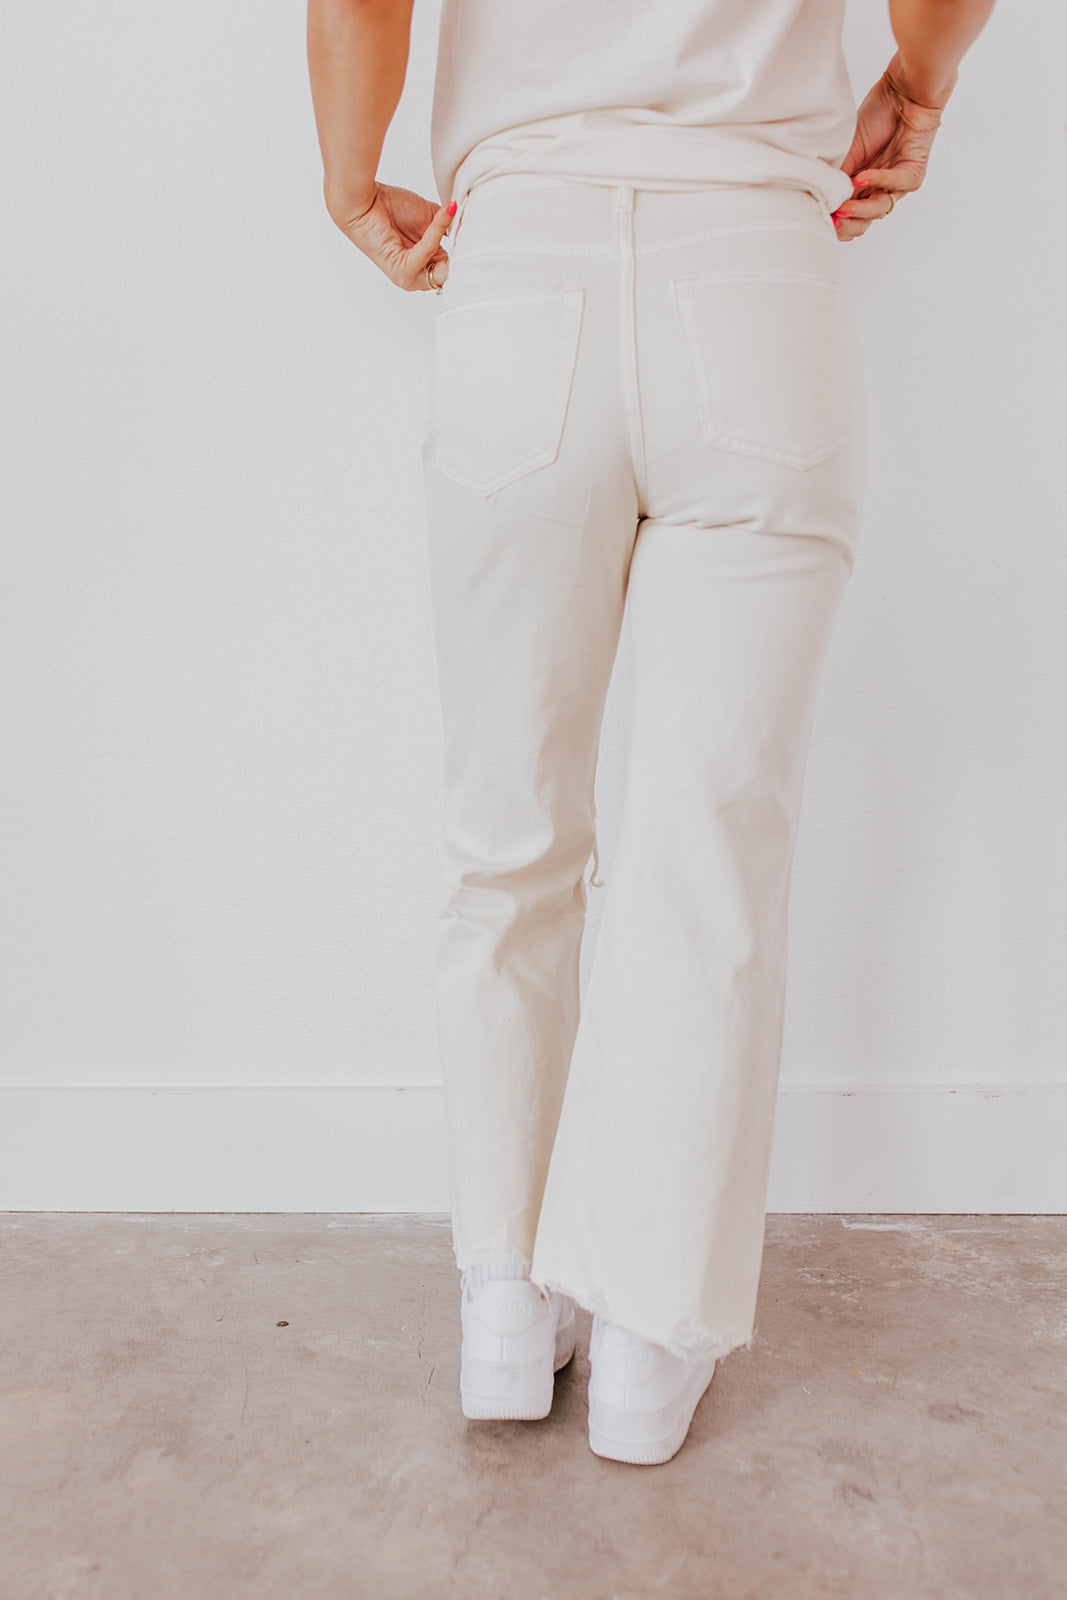 THE 90'S FLARE JEANS IN CREAM BY VERVET